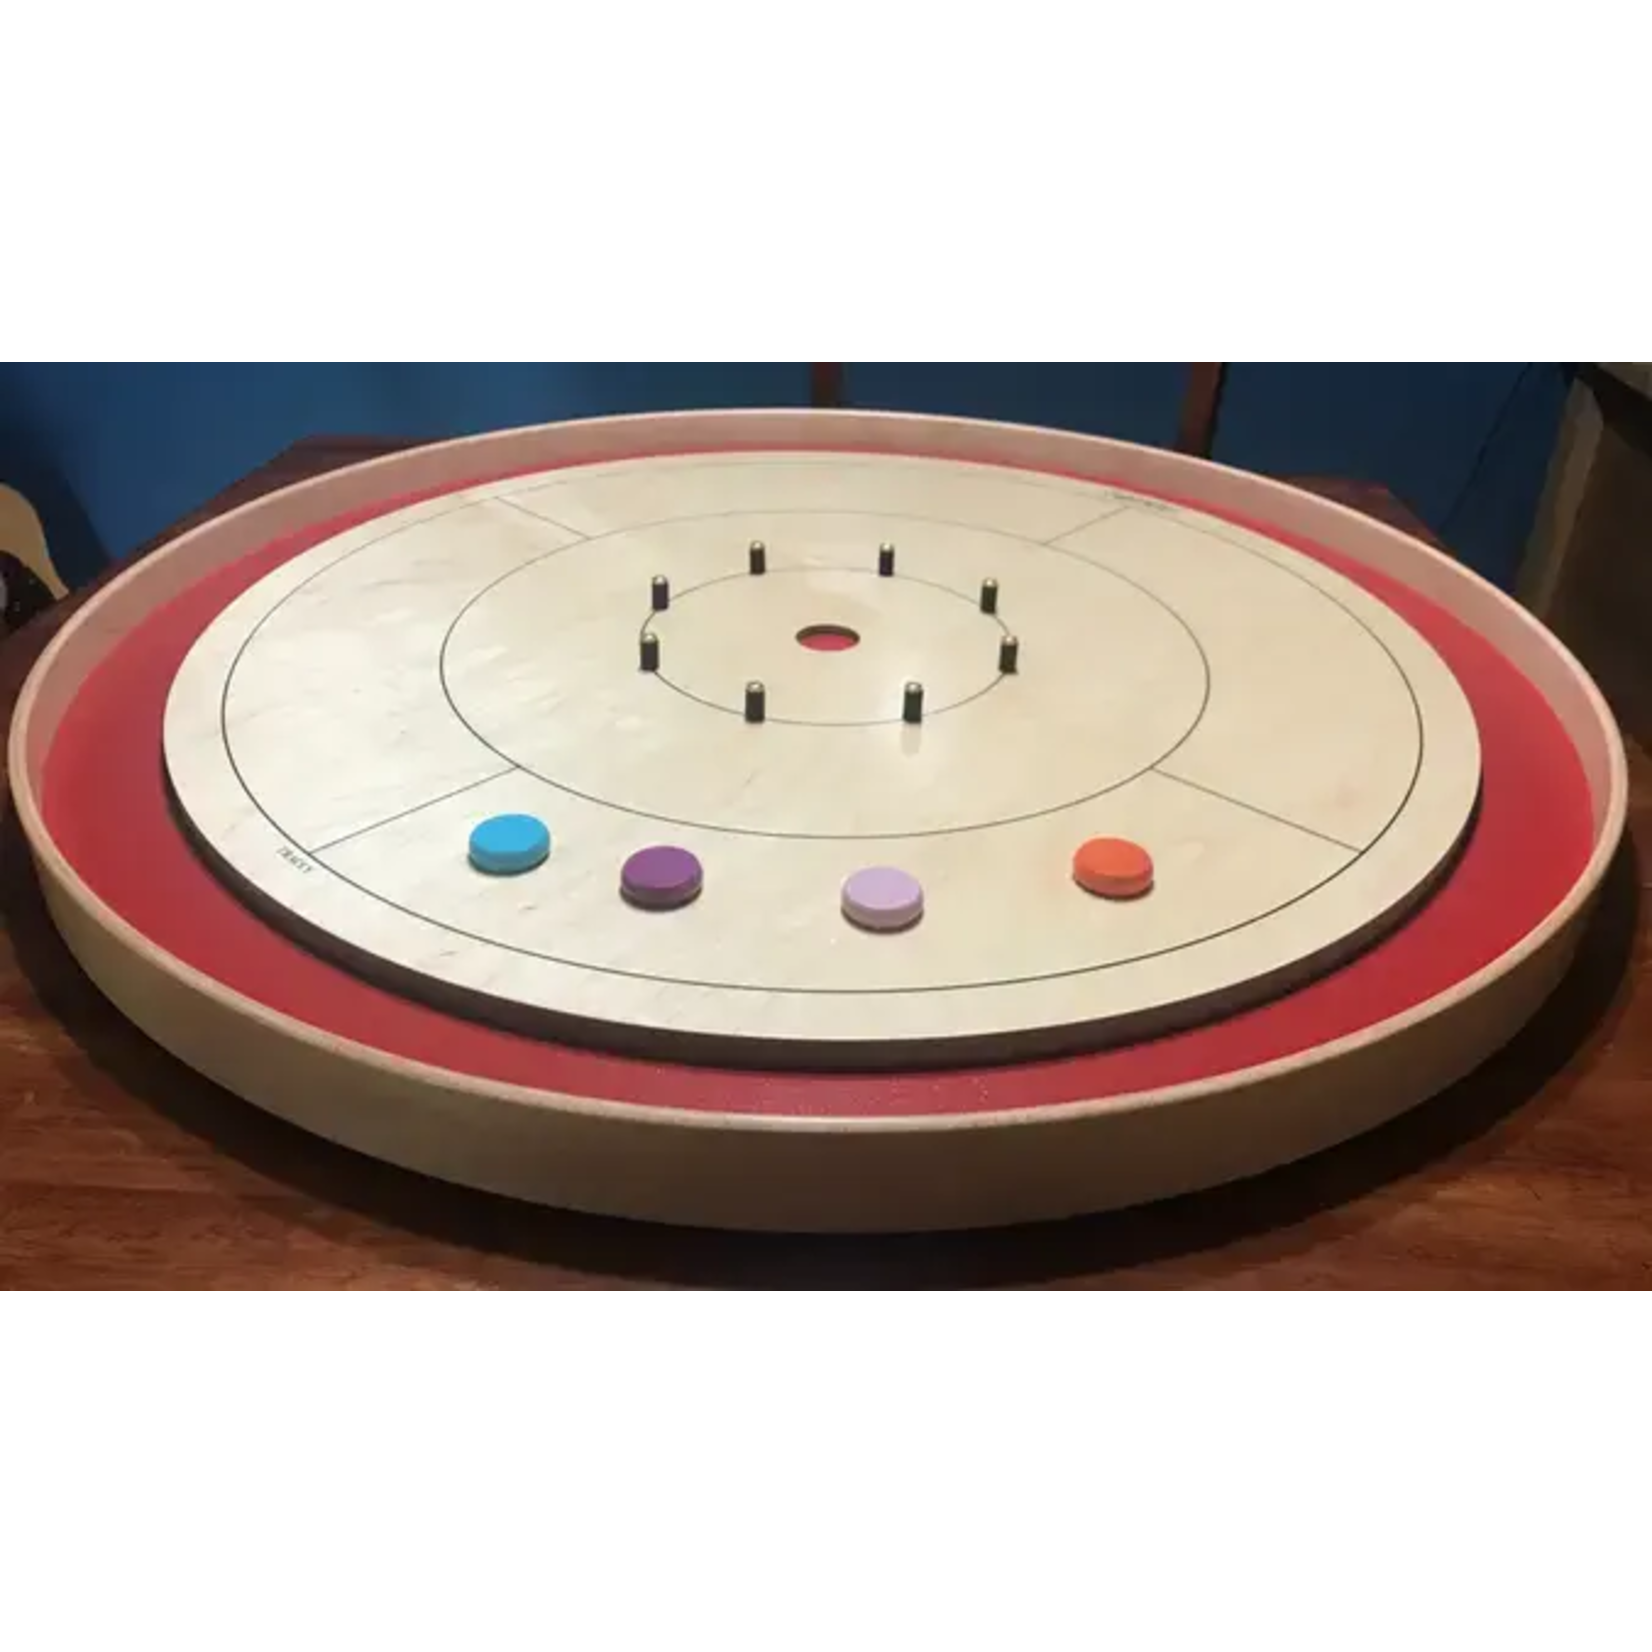 Admission: Learn to Play Crokinole (2/26/2023)